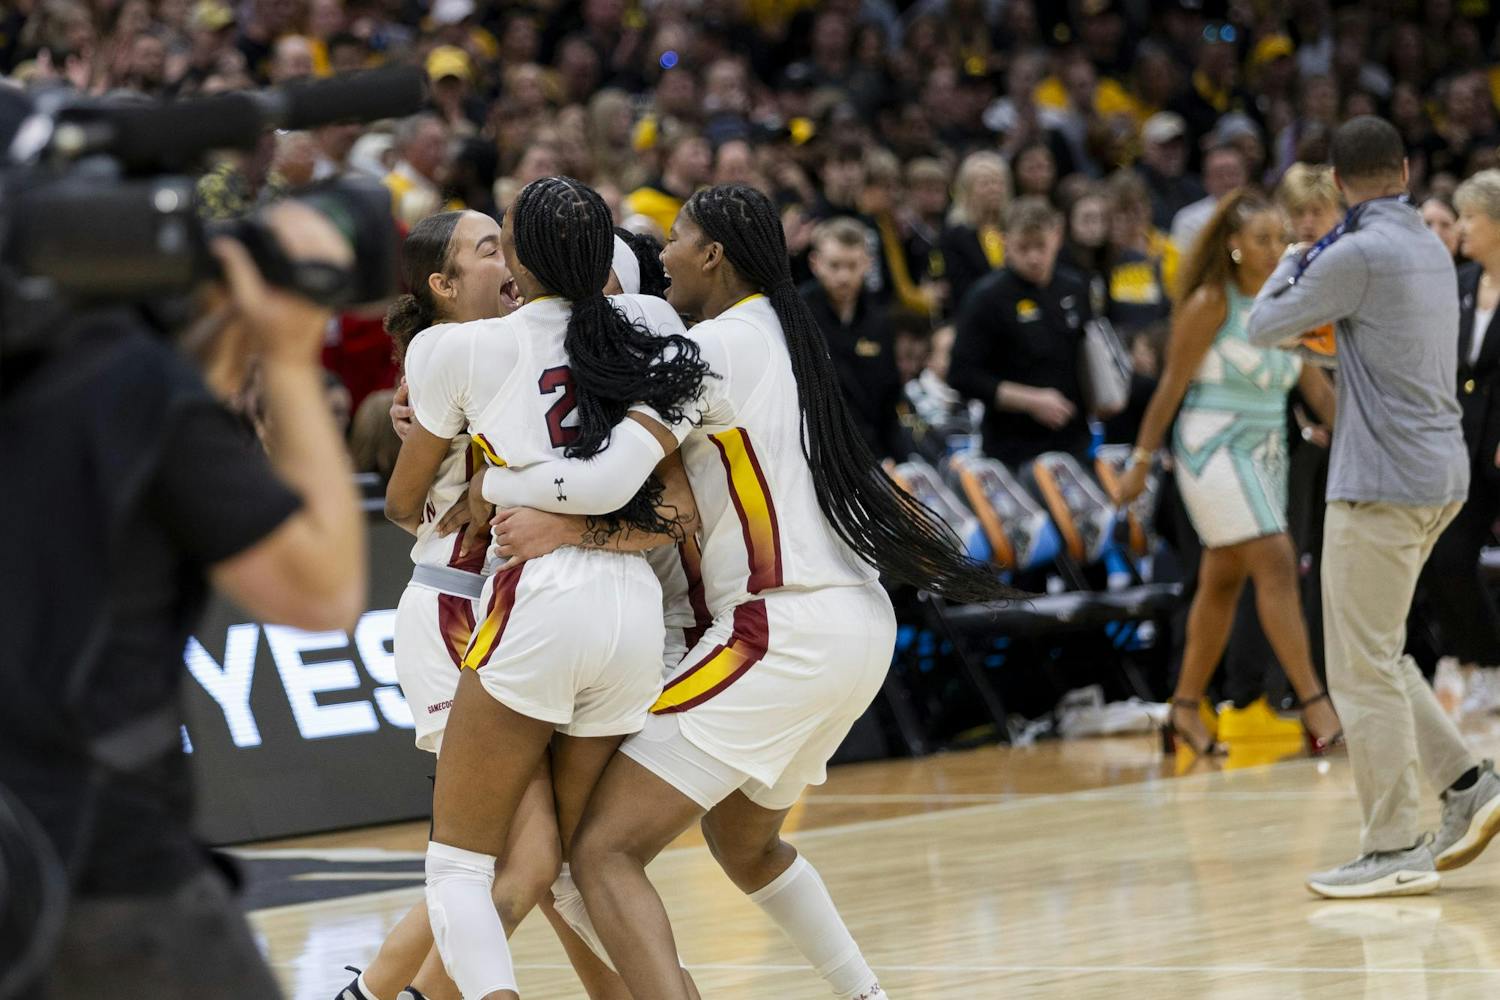 Freshman guard Tessa Johnson, junior guard Bree Hall, senior center Sakima Walker and senior guard Te-Hina Paopao hug in celebration after winning the national championship game. The Gamecocks completed a perfect, undefeated season ending in a national title for the first time in program history.